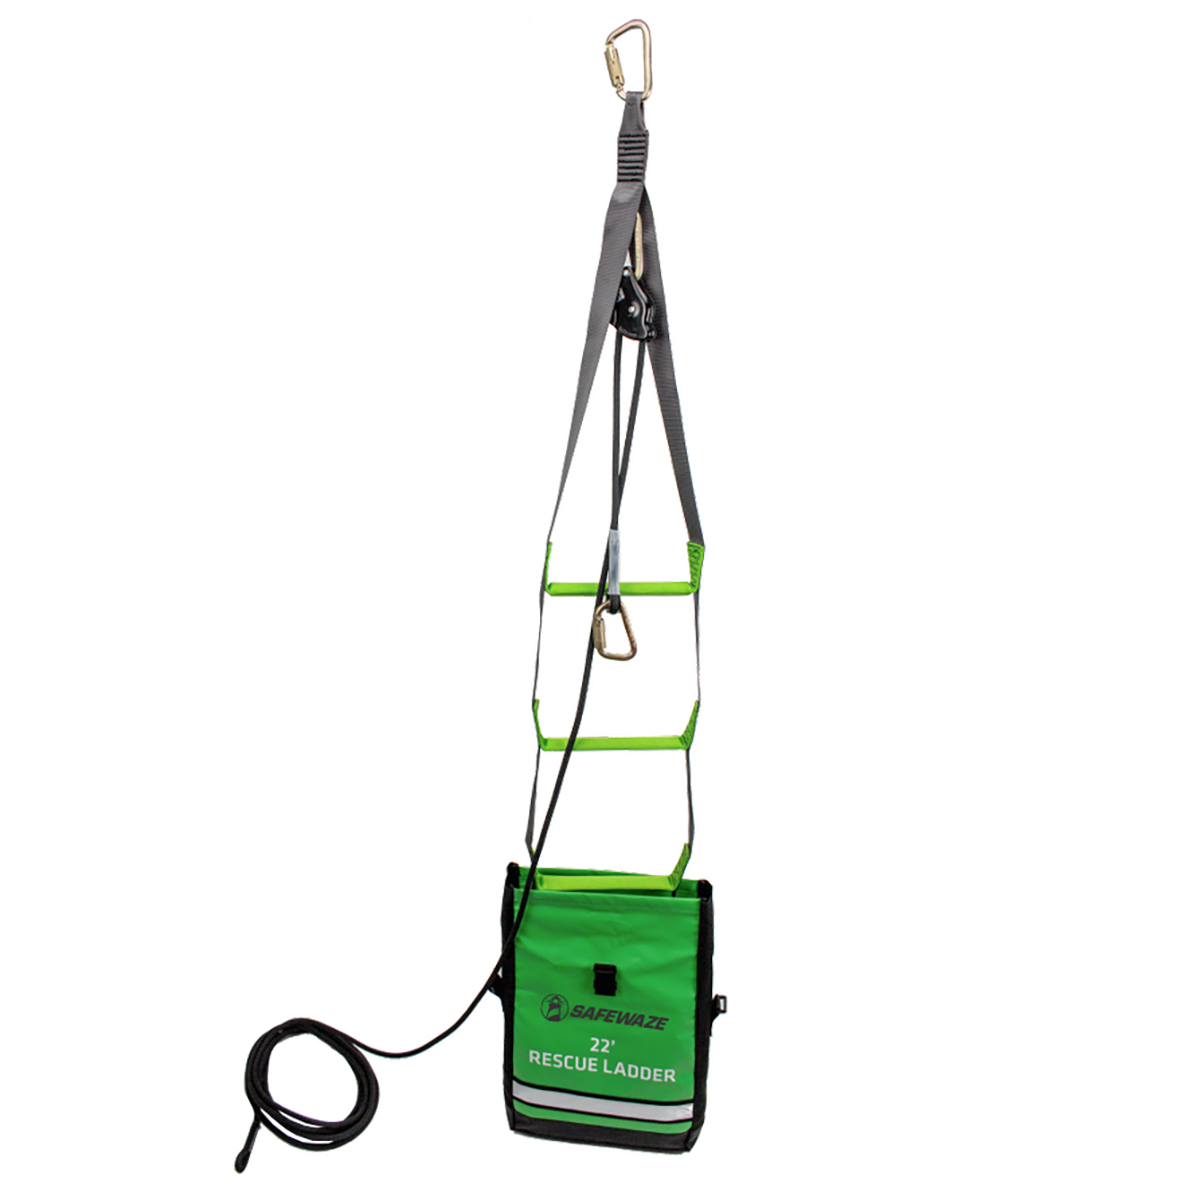 22ft Rescue Ladder with Belay - Safety Products